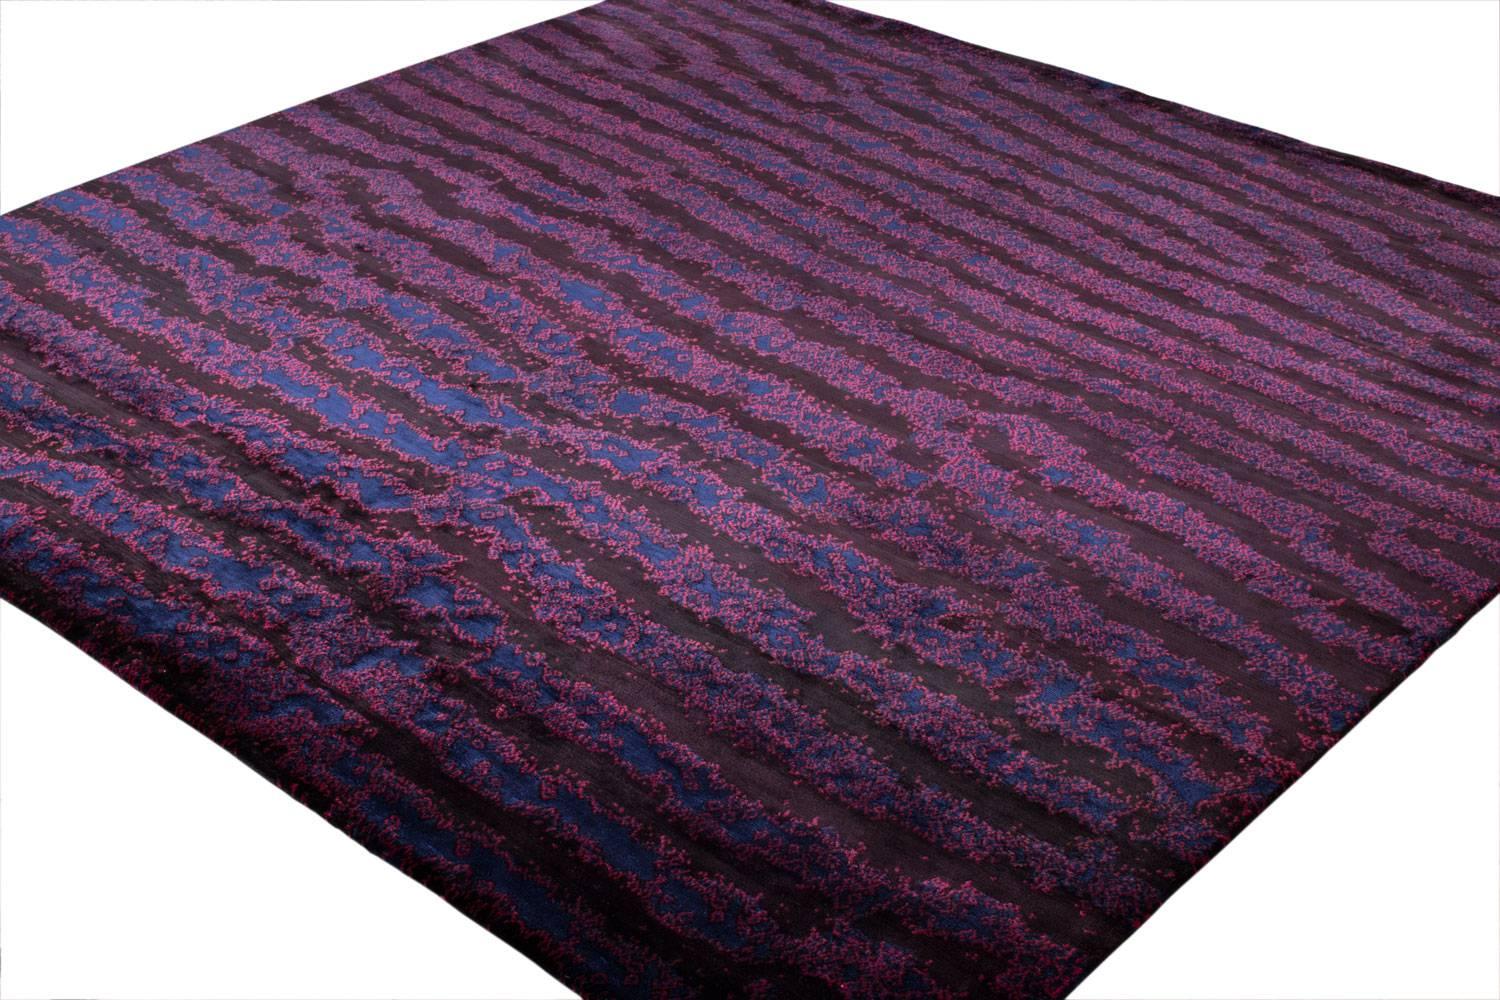 Deep purple solid silk carpet, hand dyed with vegetable dye and handwoven. Wavy stripes of color alternate with bands of froth in the tranquil pattern of Fishskin. It loosely resembles the camouflage of tropical creatures and repetitive waves